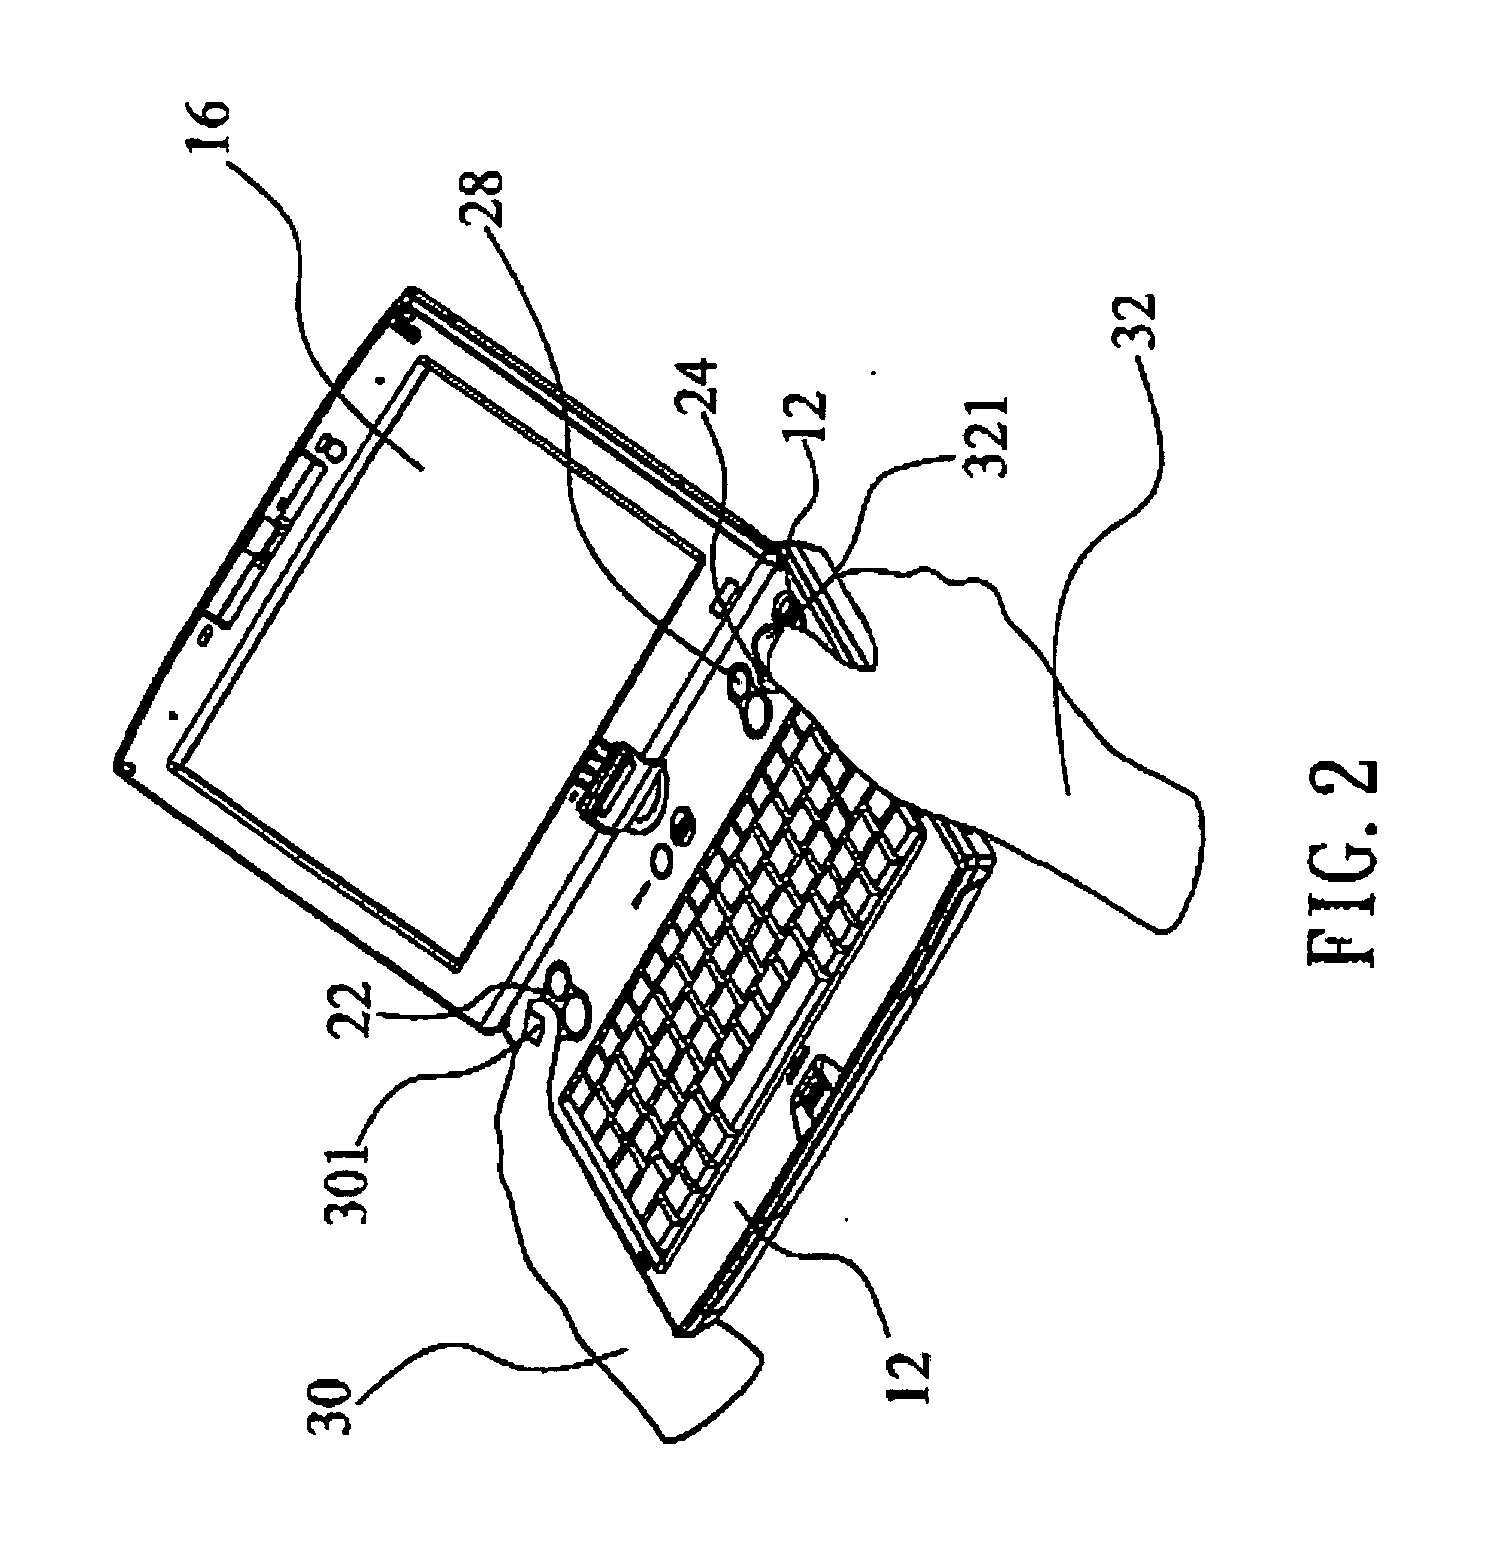 Portable apparatus with thumb control interface